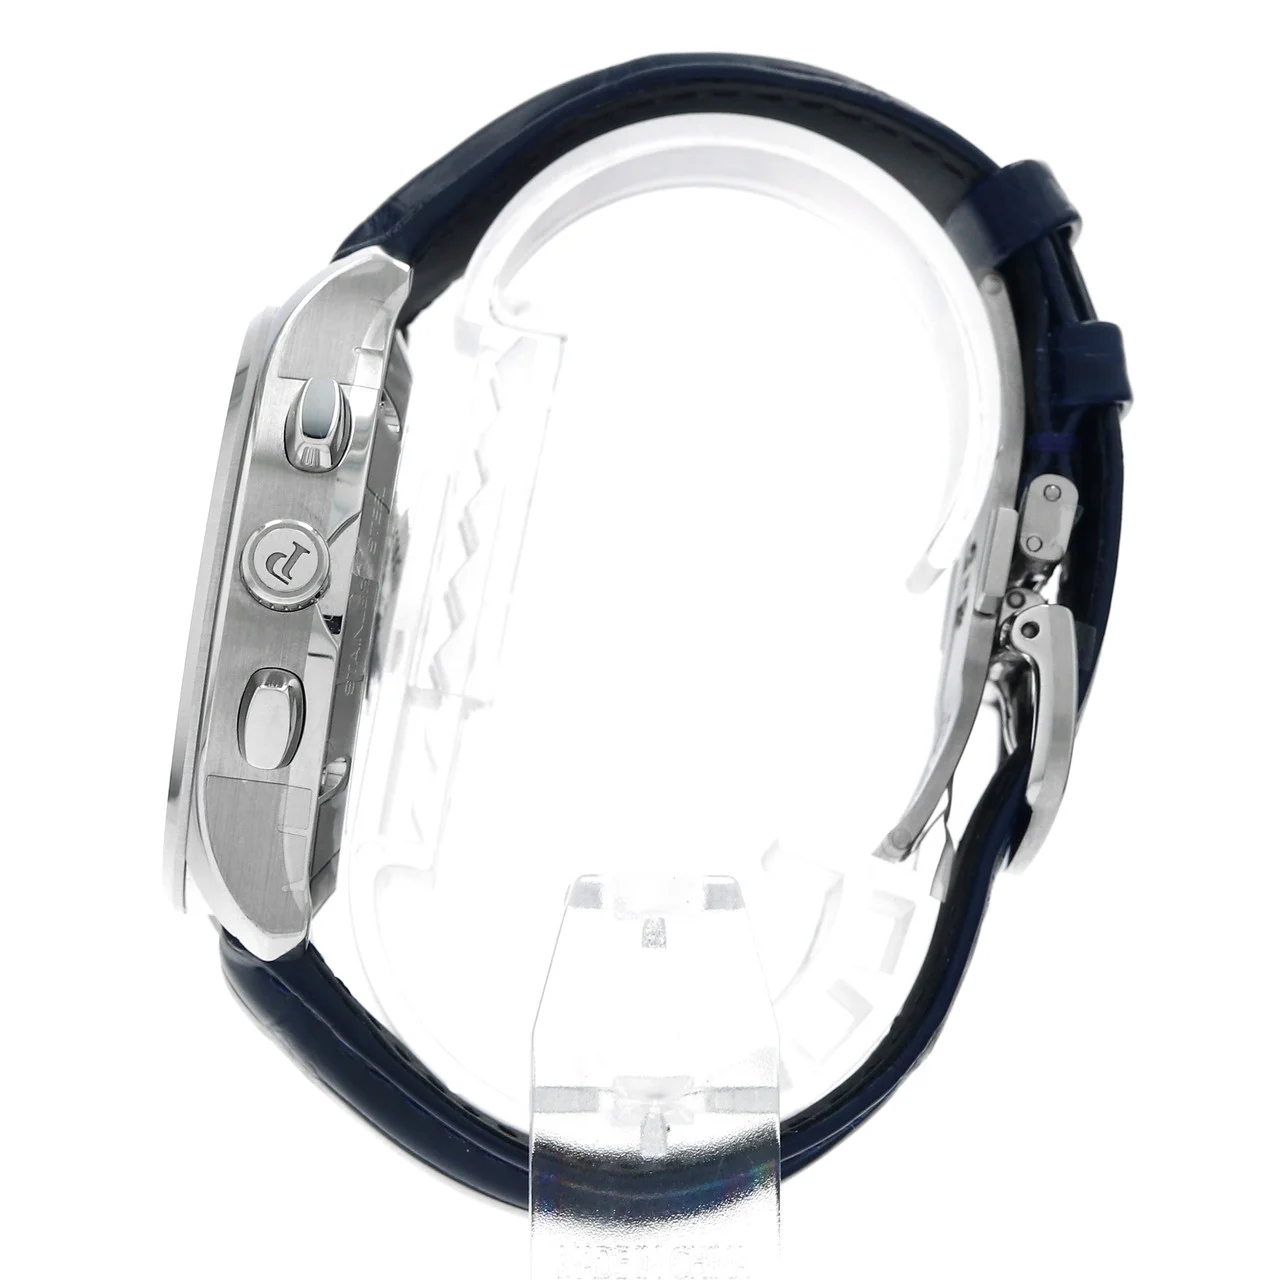 2022 Piaget Polo S Steel / Blue / Strap G0A43002  Listing Image 4